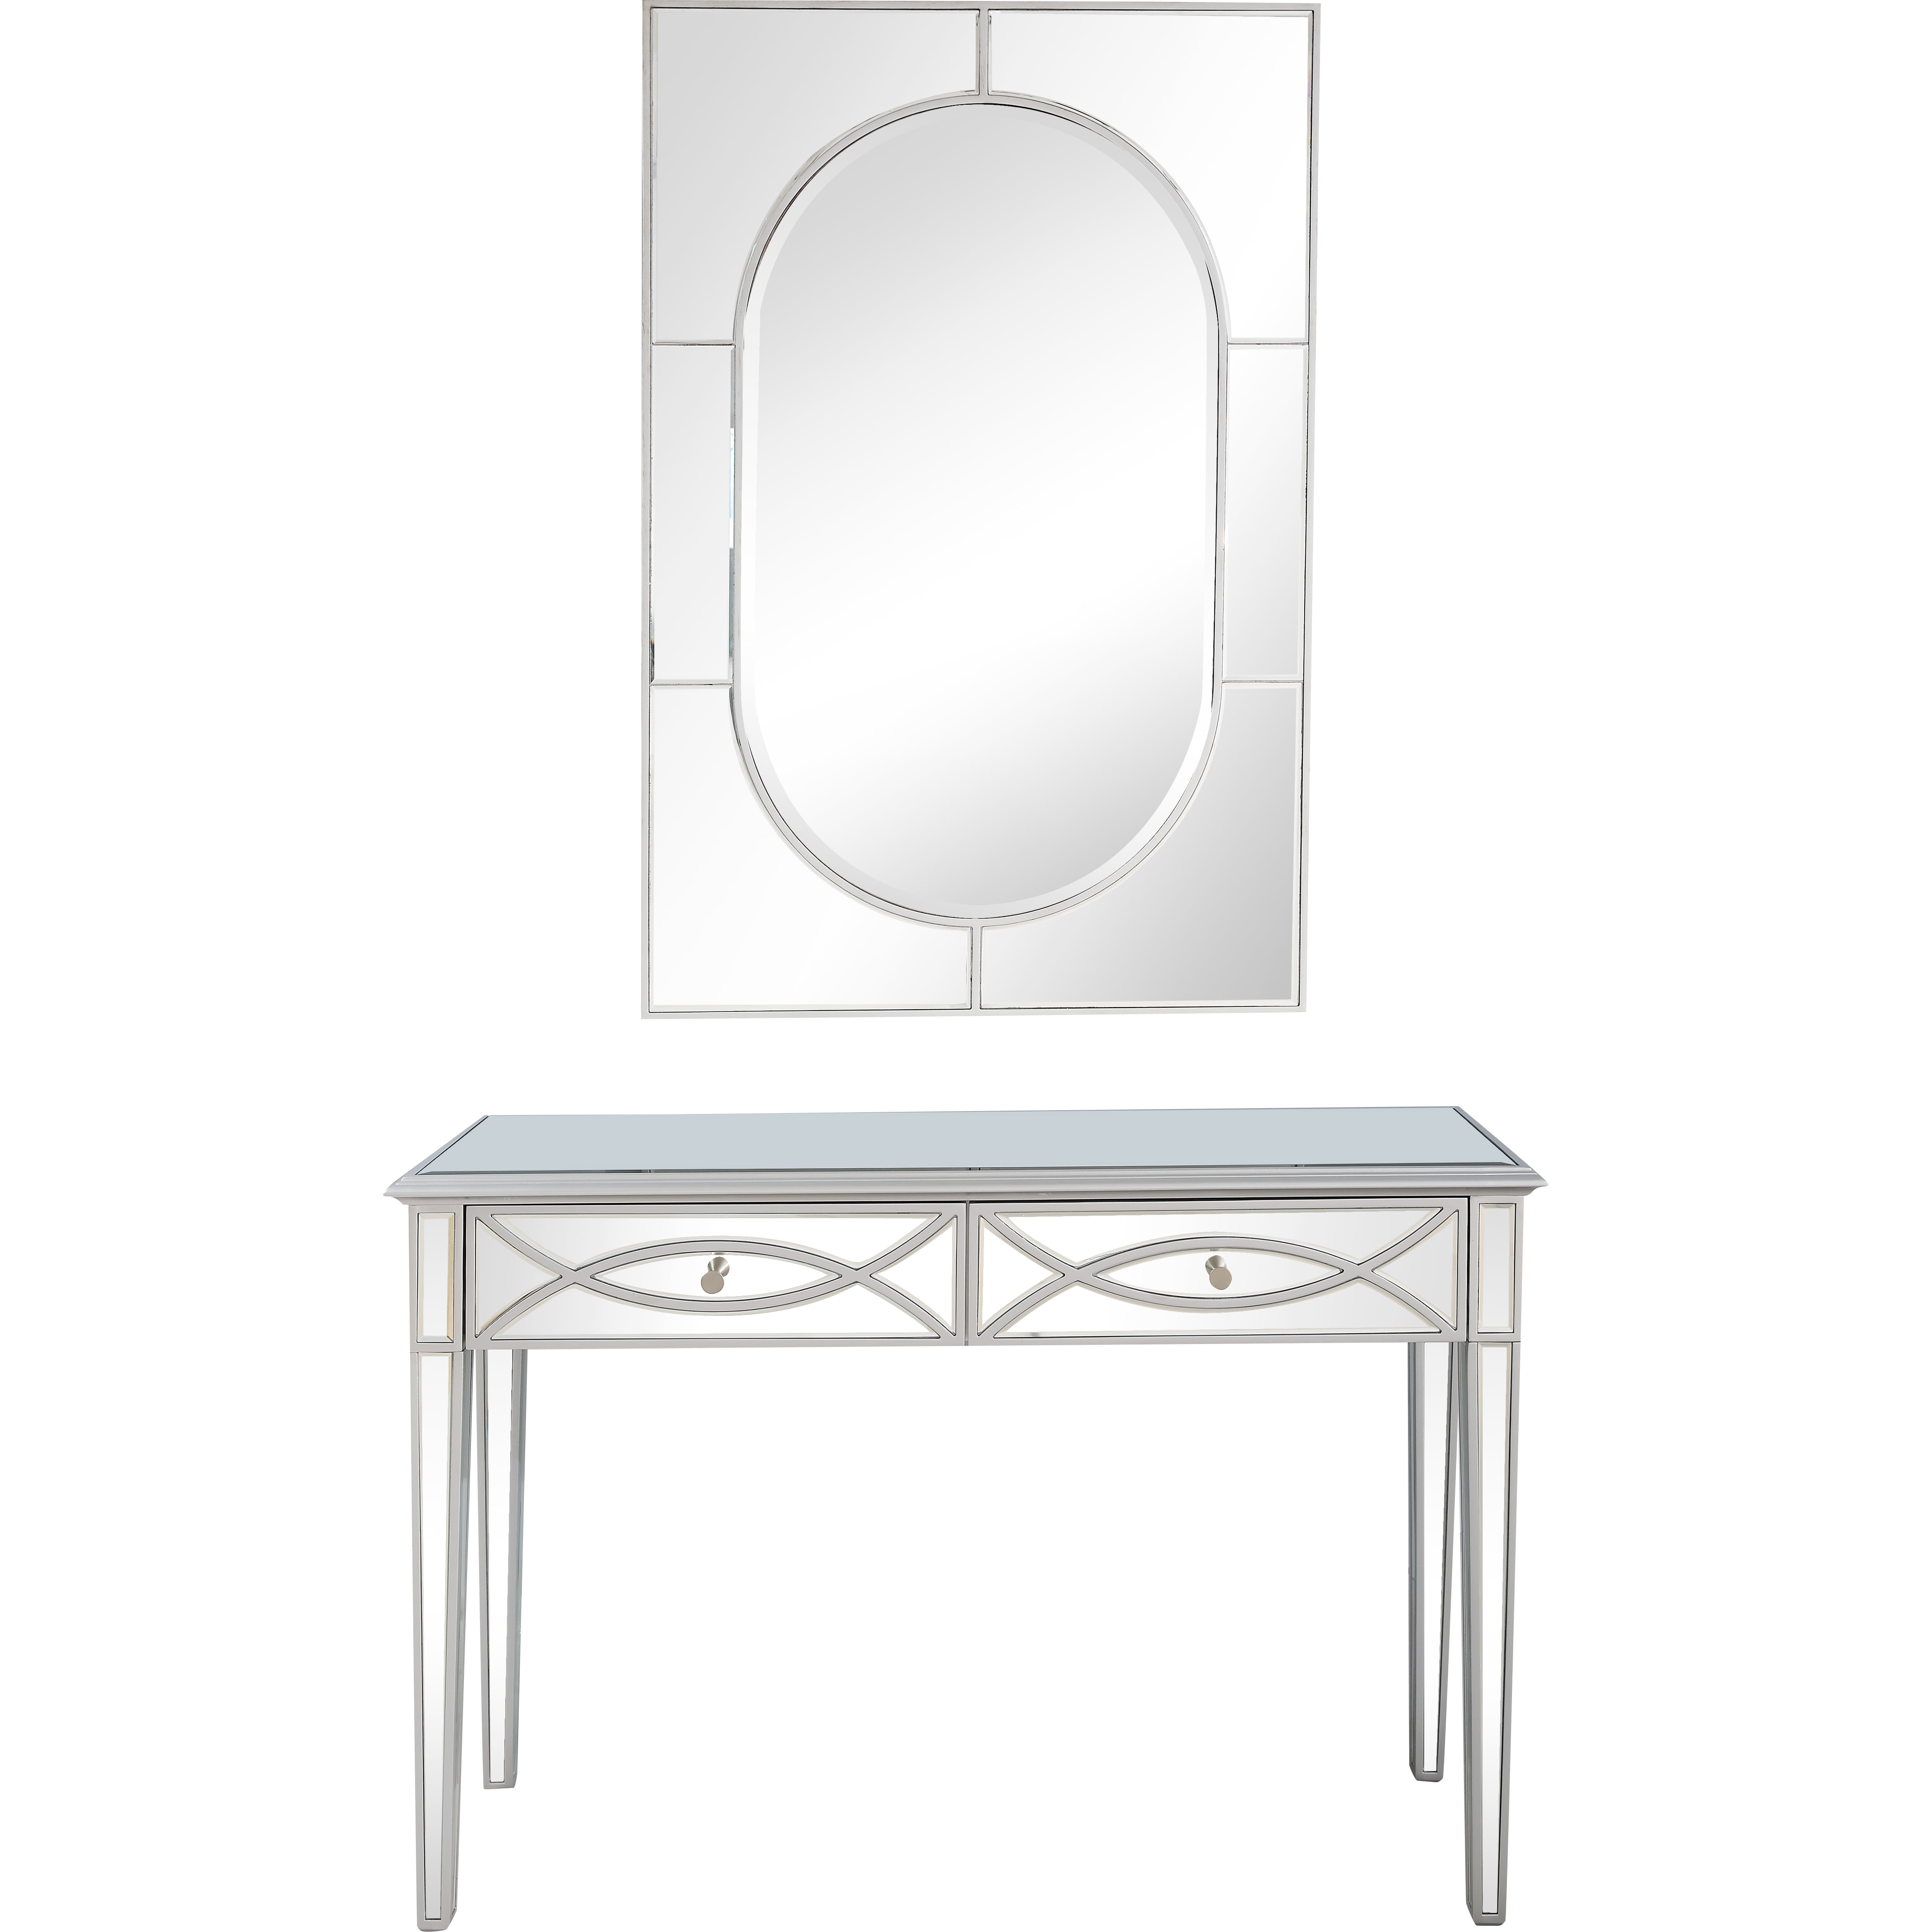 Picture of Camden Isle 86437 Helena Wall Mirror and Console Table